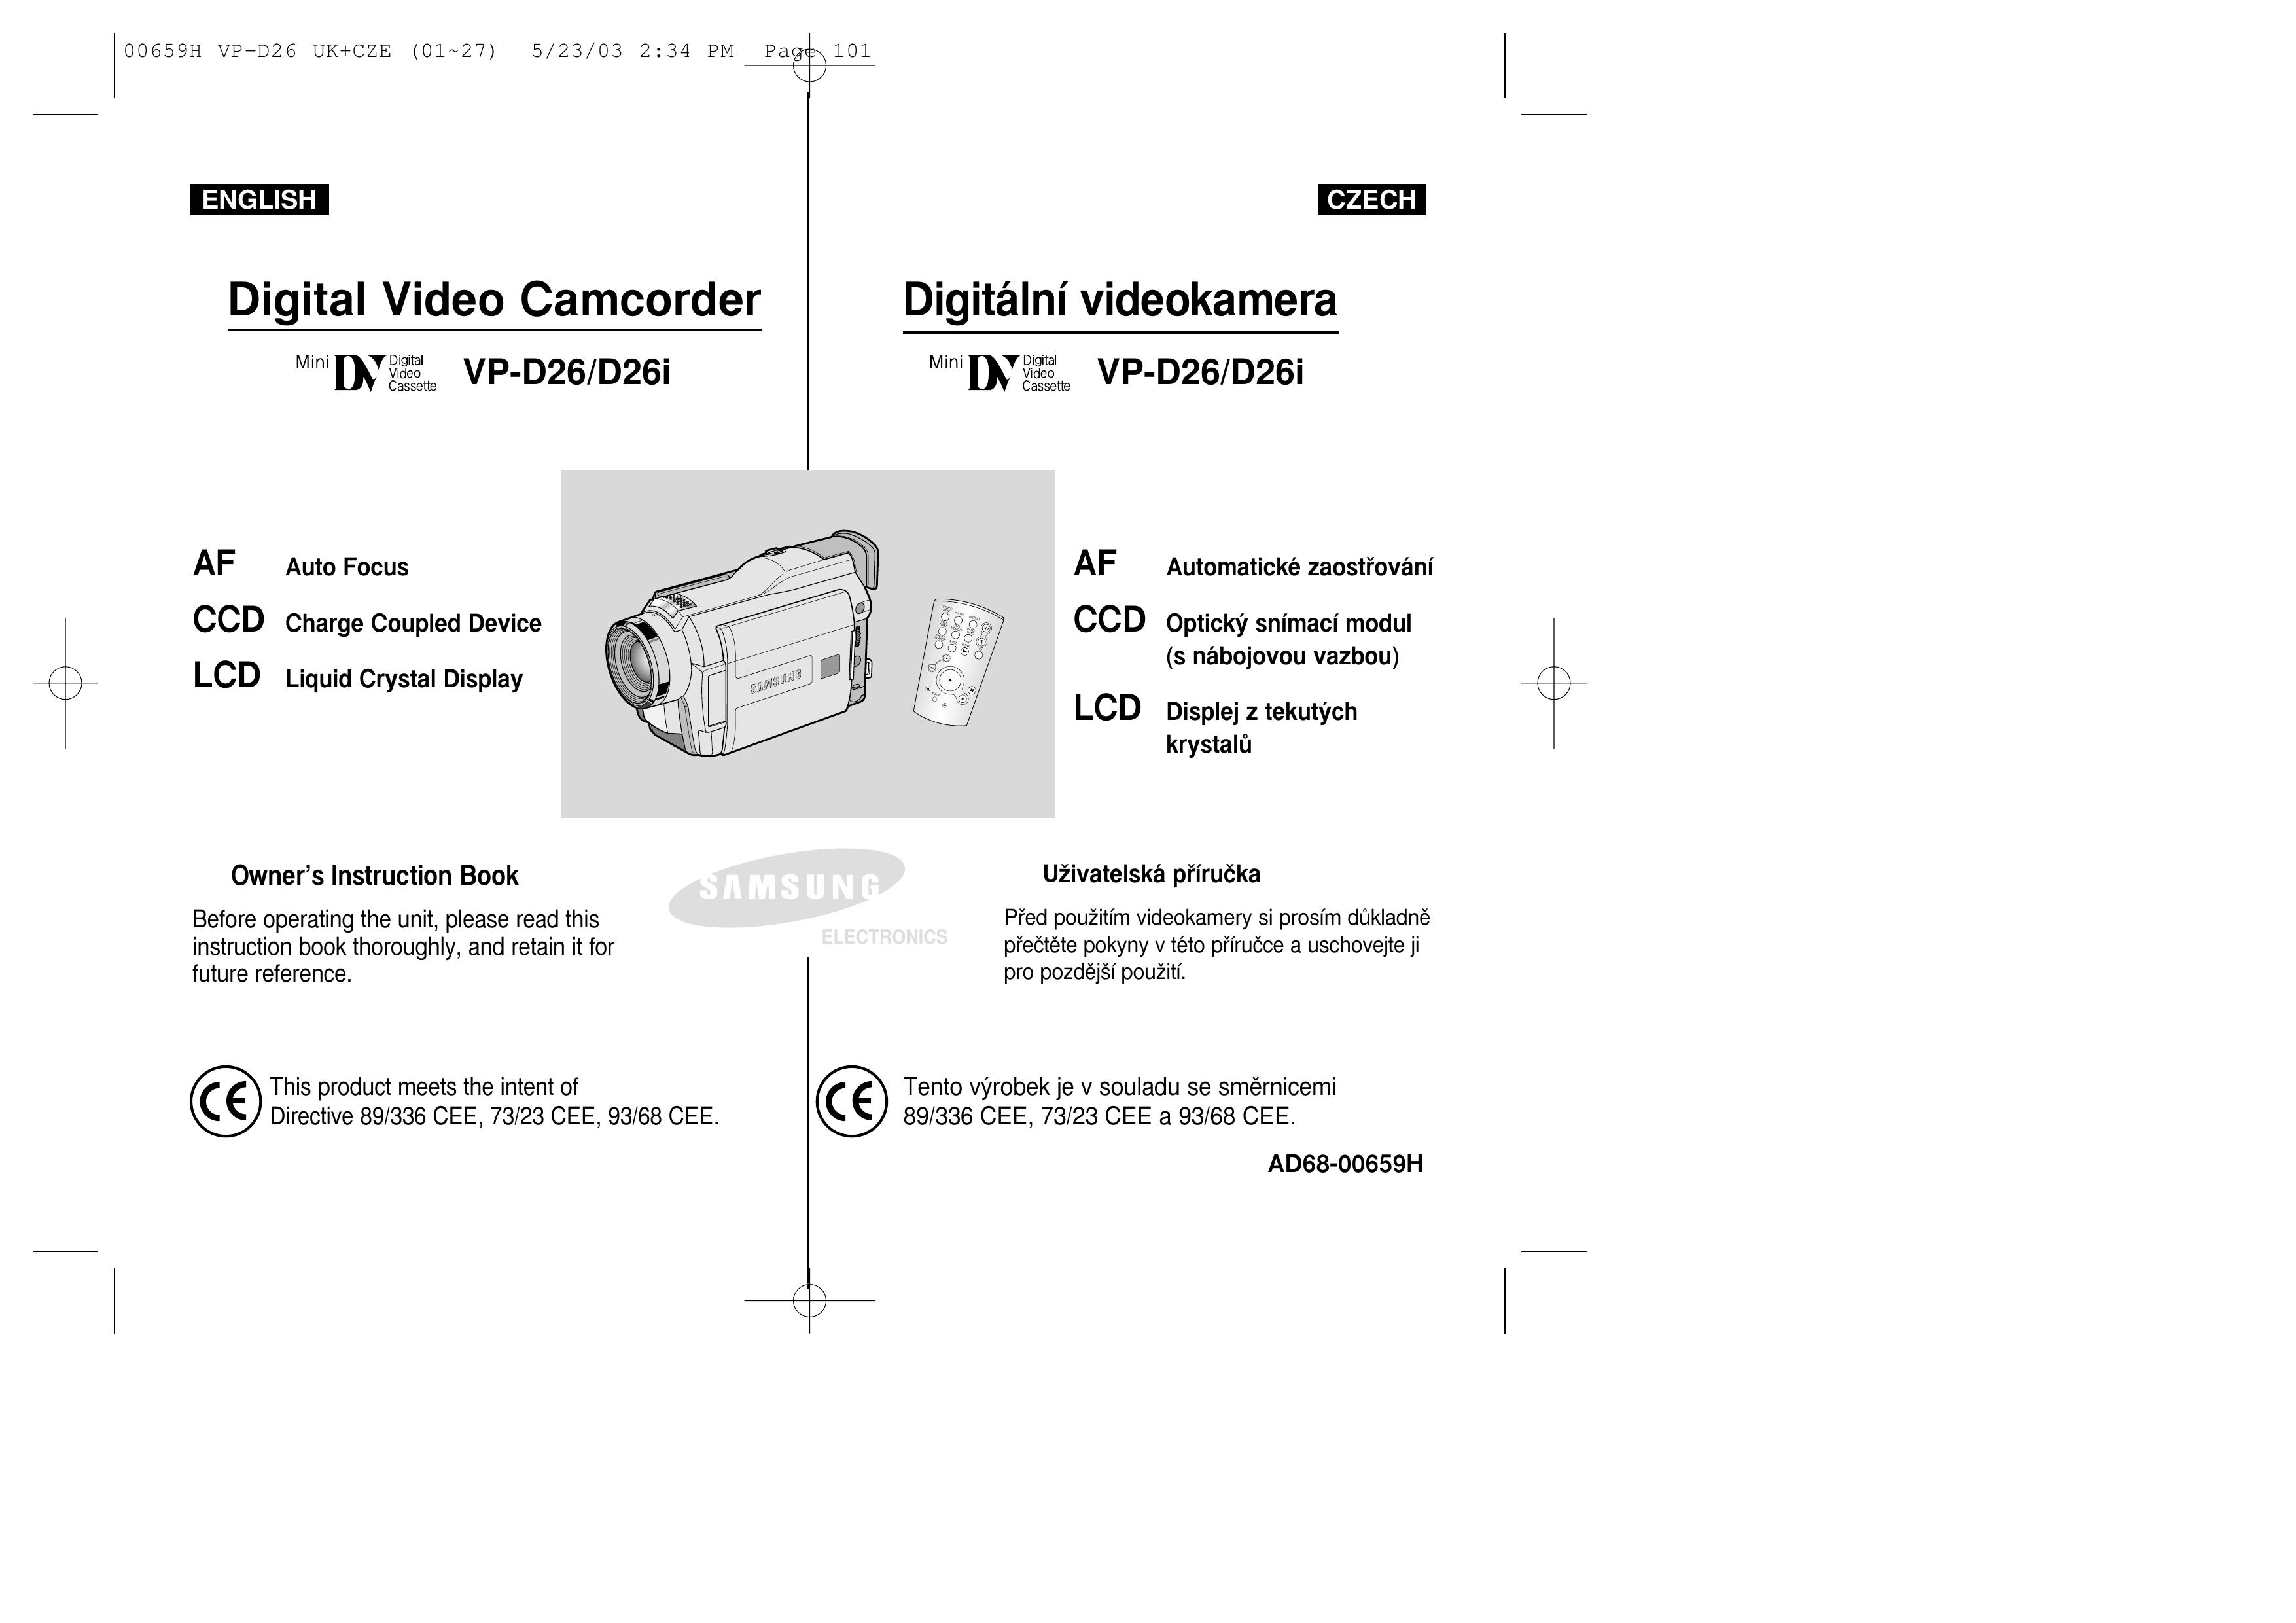 Samsung VP-D26 Camcorder Accessories User Manual